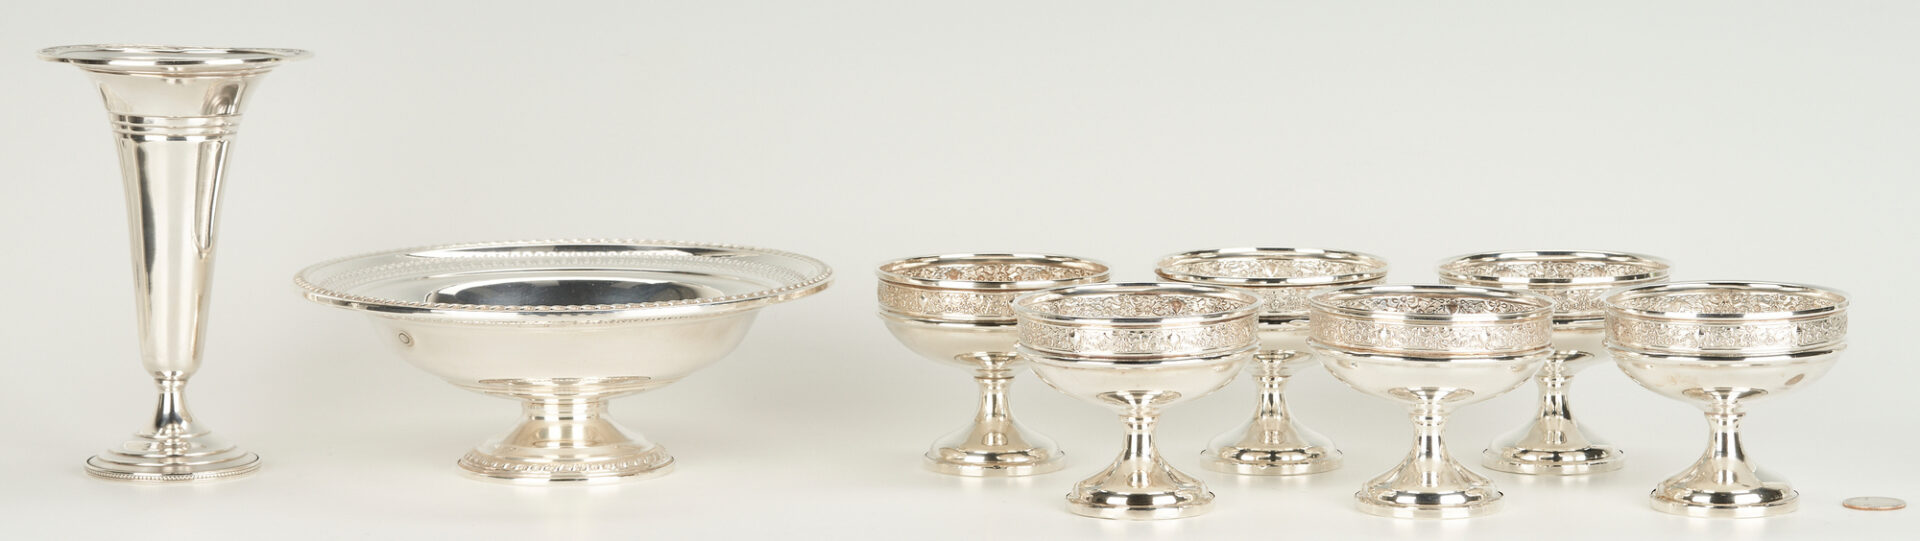 Lot 1203: 8 Sterling Silver Hollowware Items w/ Weighted Bases, incl. 6 Hirsch Sherbets, Webster Co. Vase, La Pierre Compote